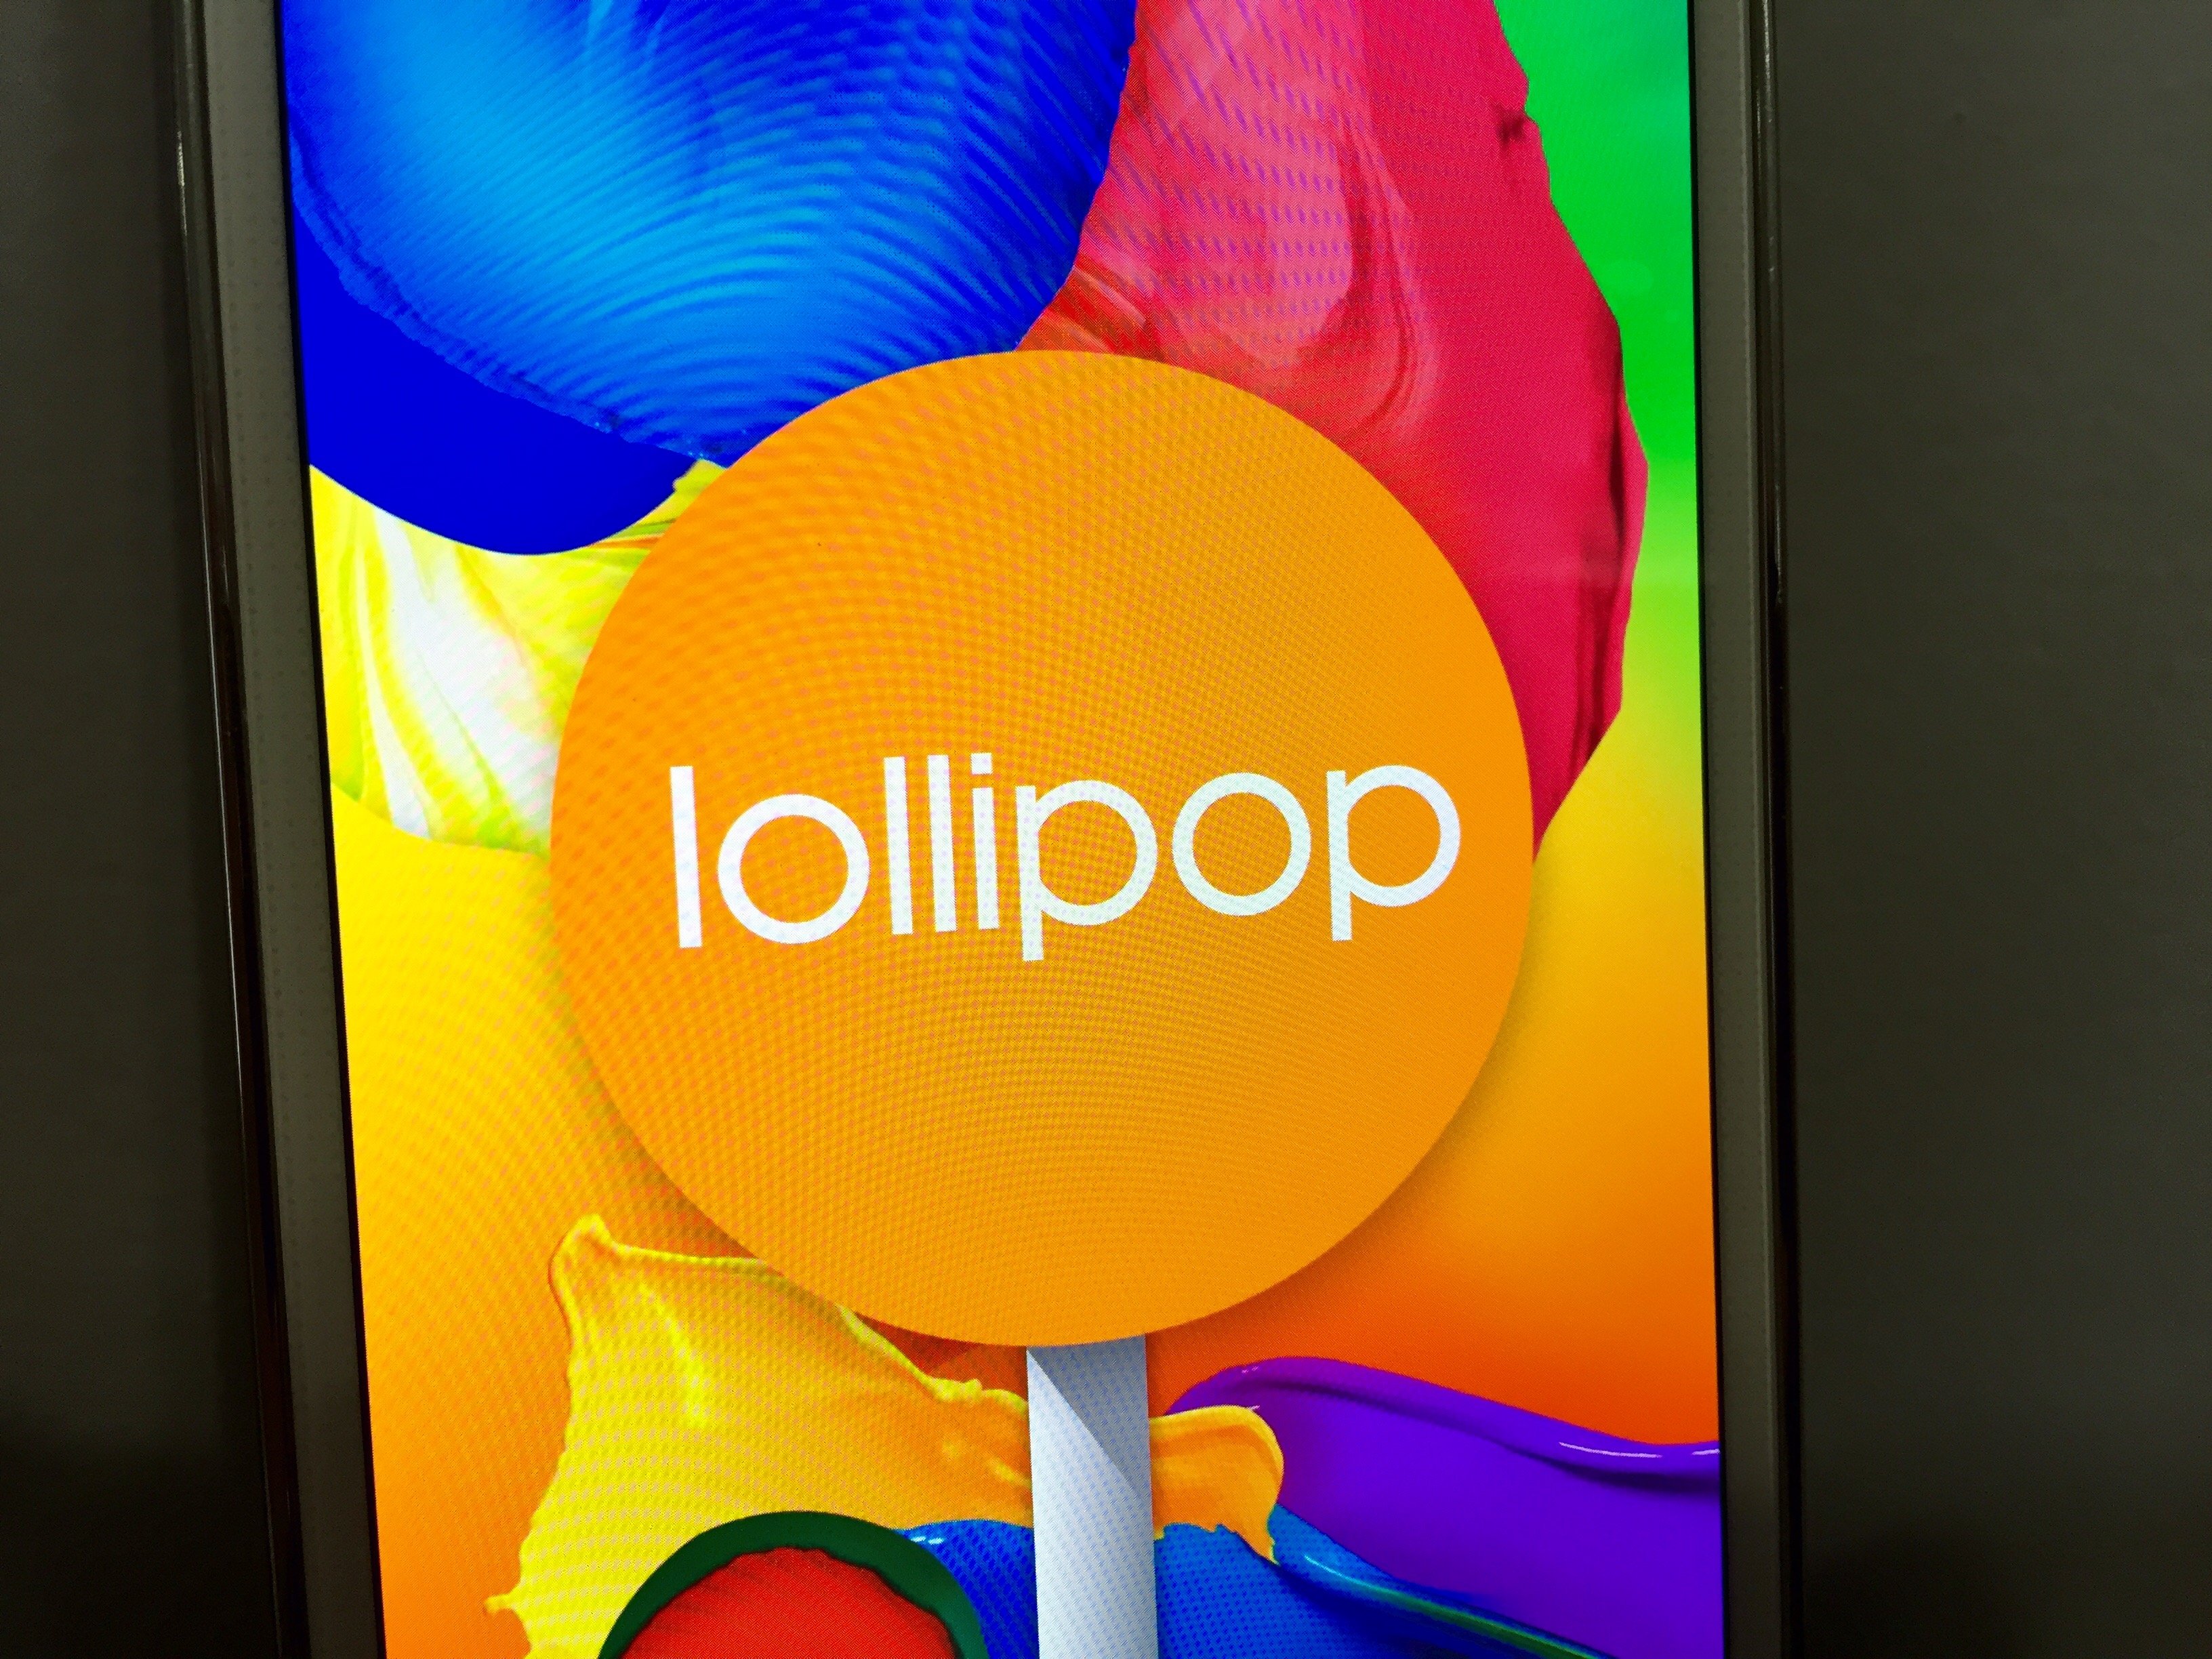 Should you tap install on the AT&T Galaxy S5 lollipop update?